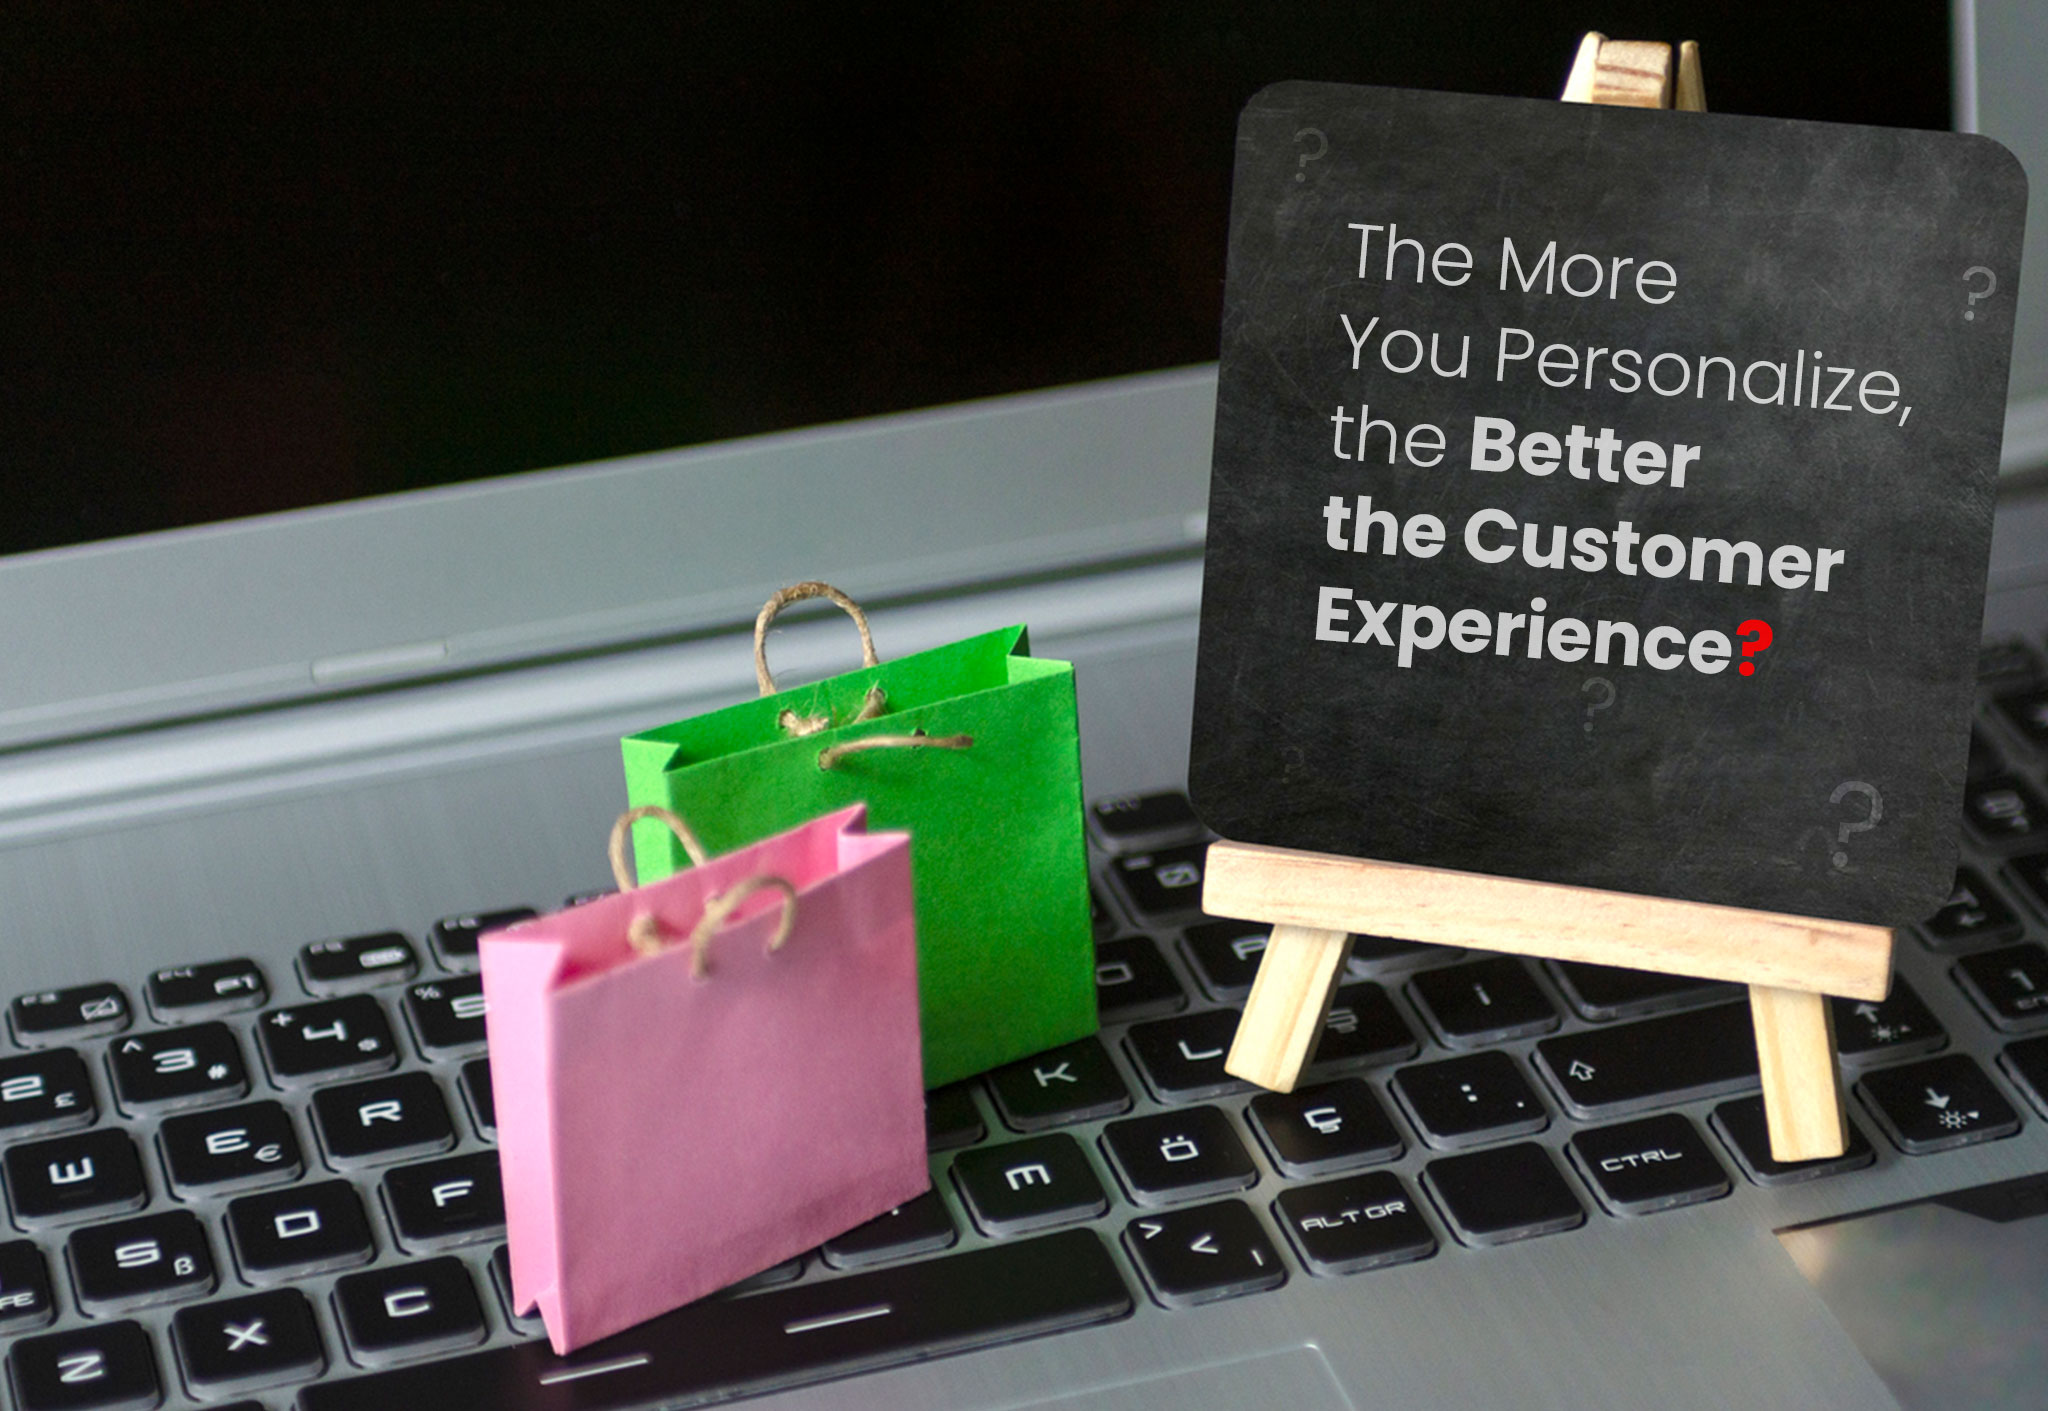 The More You Personalize, the Better the Customer Experience – True or False?